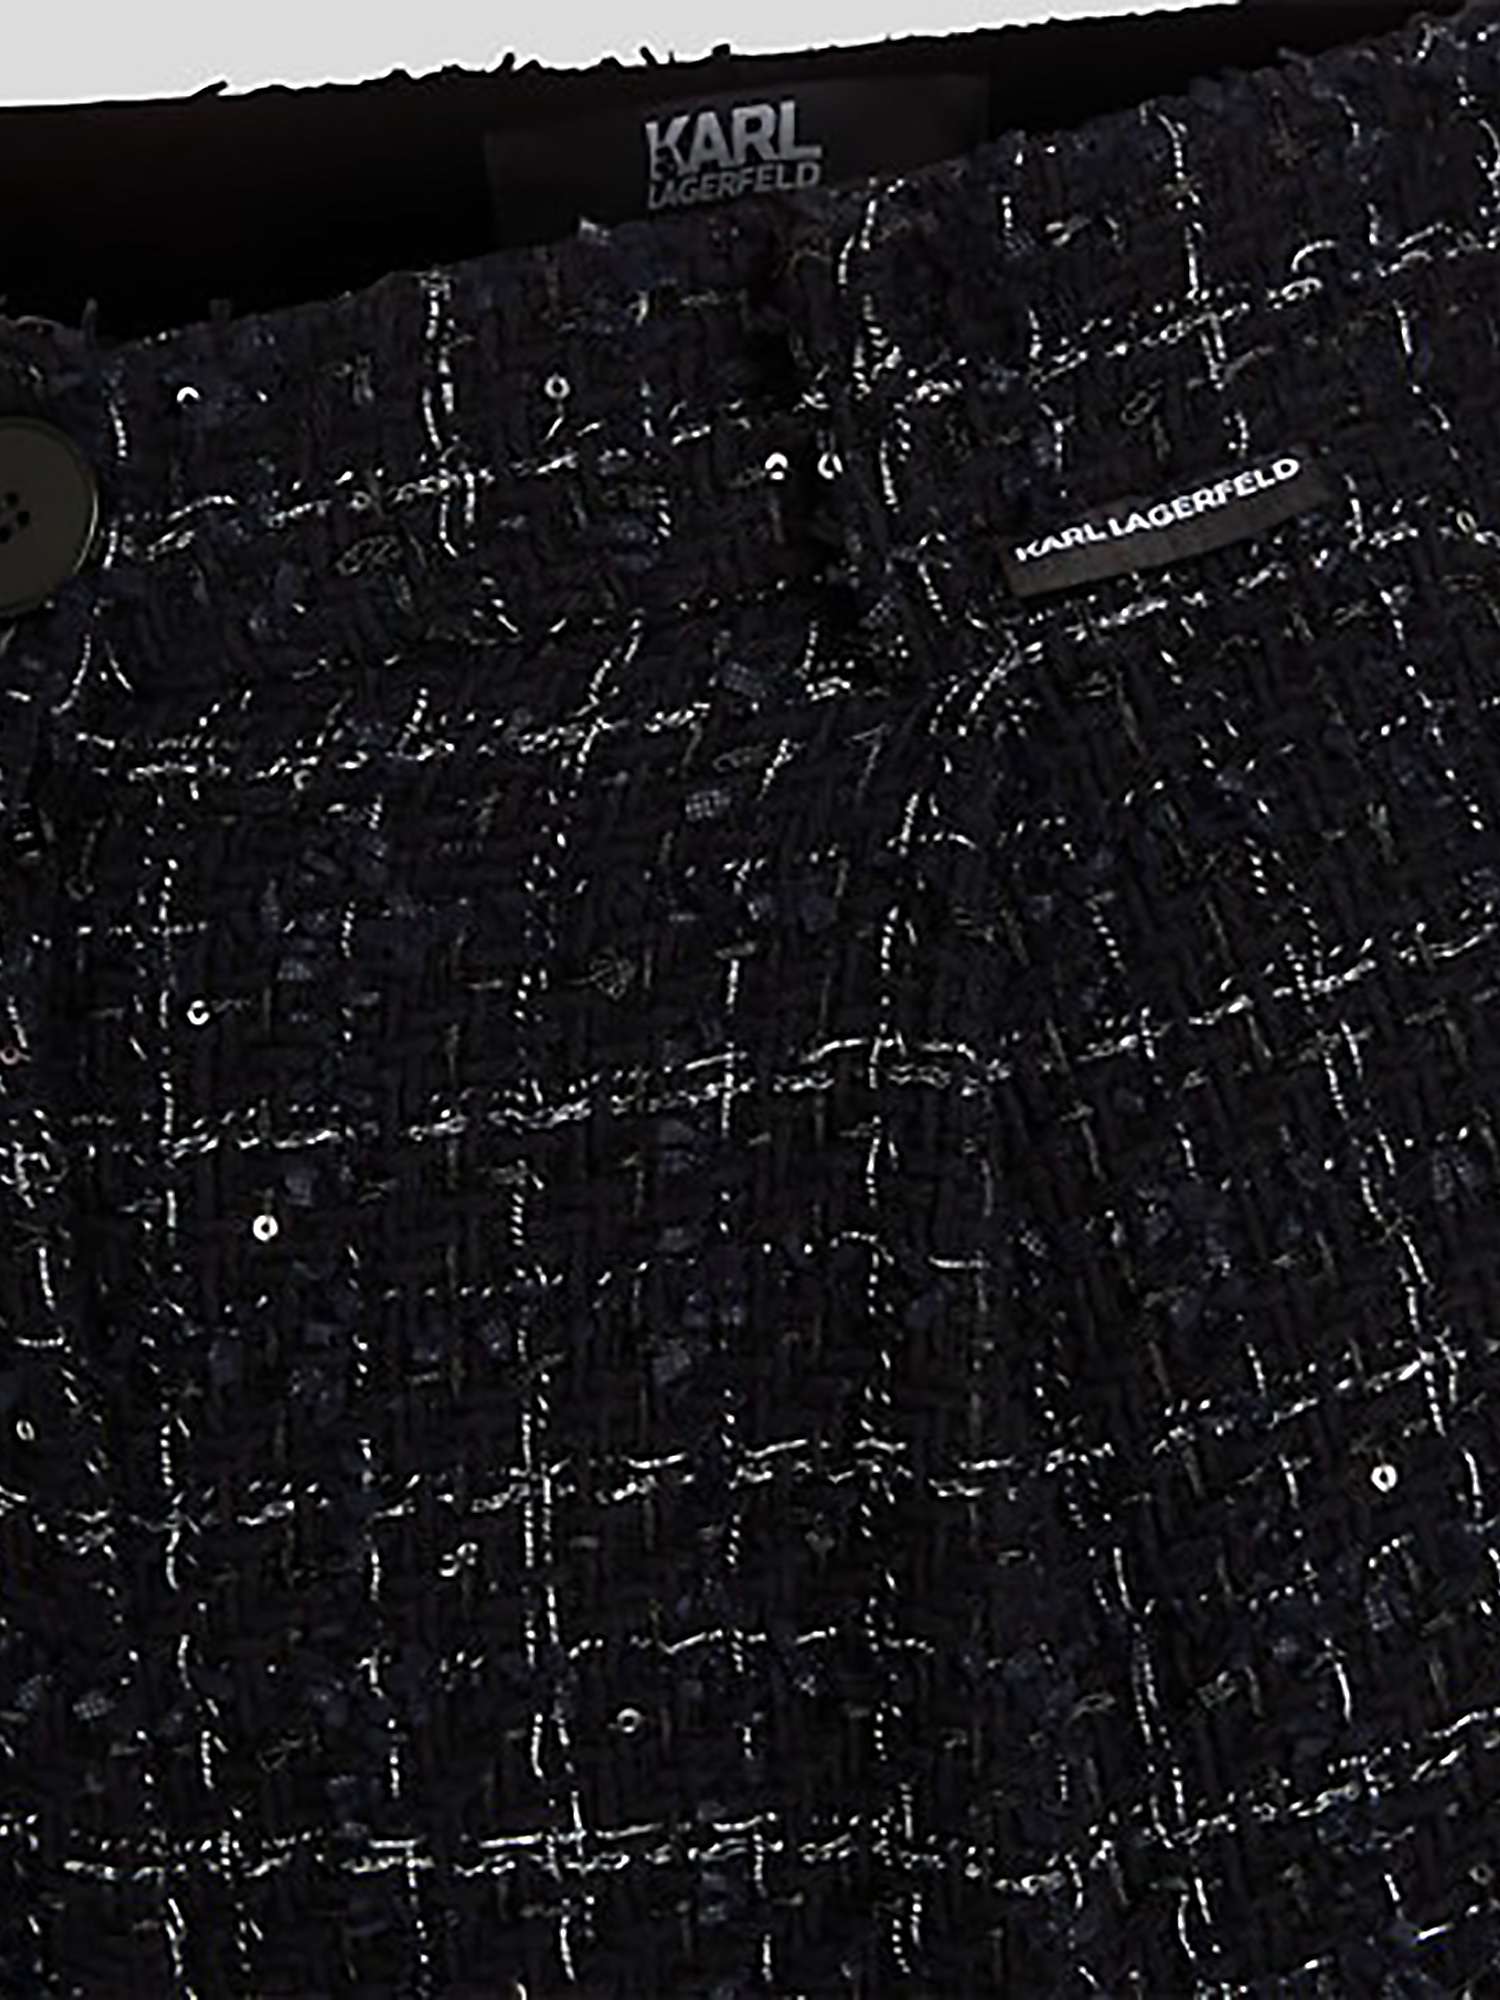 Buy KARL LAGERFELD Check Boucle Trousers, Black/Silver Online at johnlewis.com